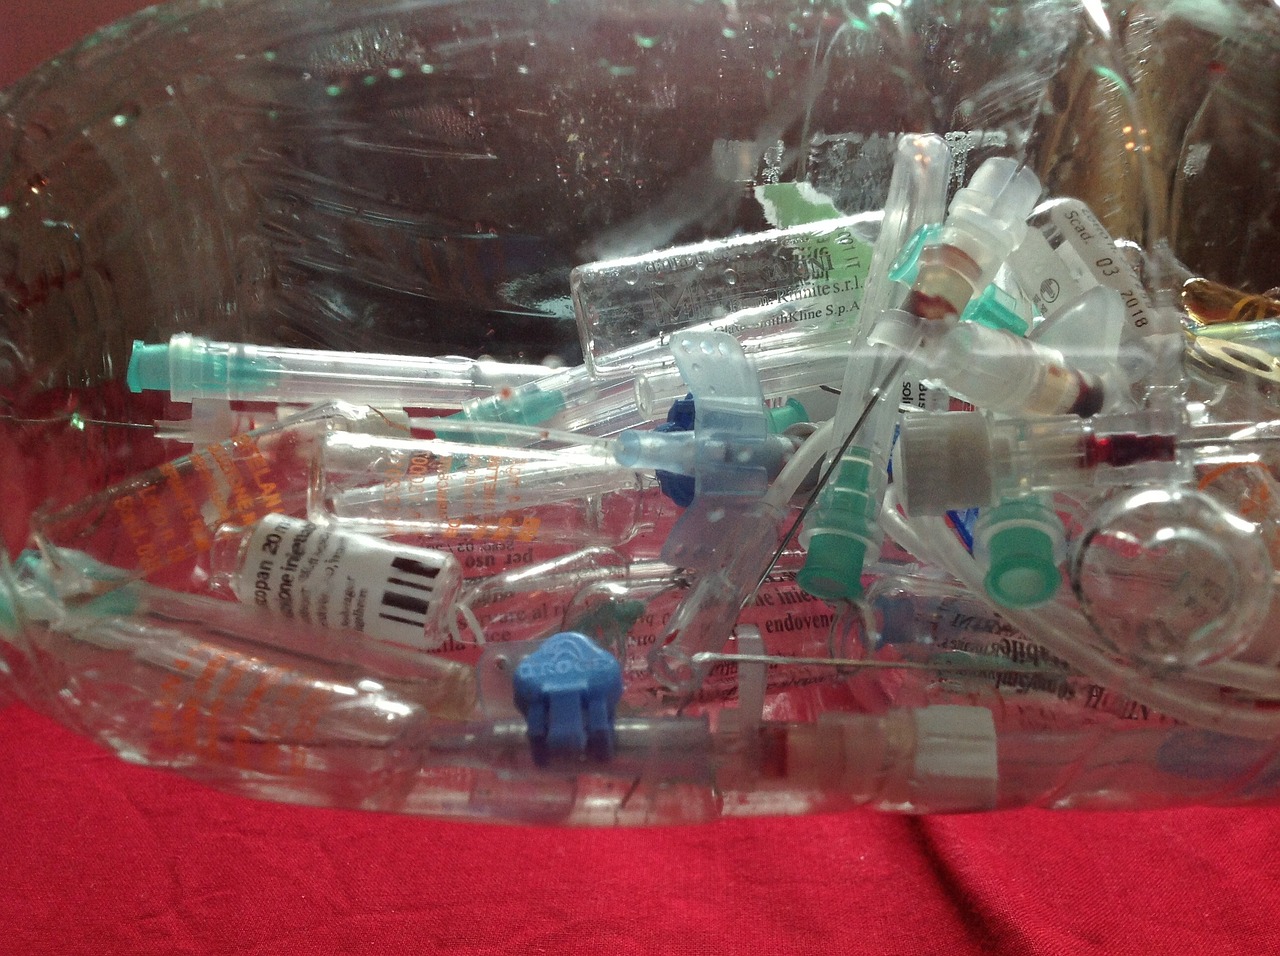 How to start a medical waste disposal business?